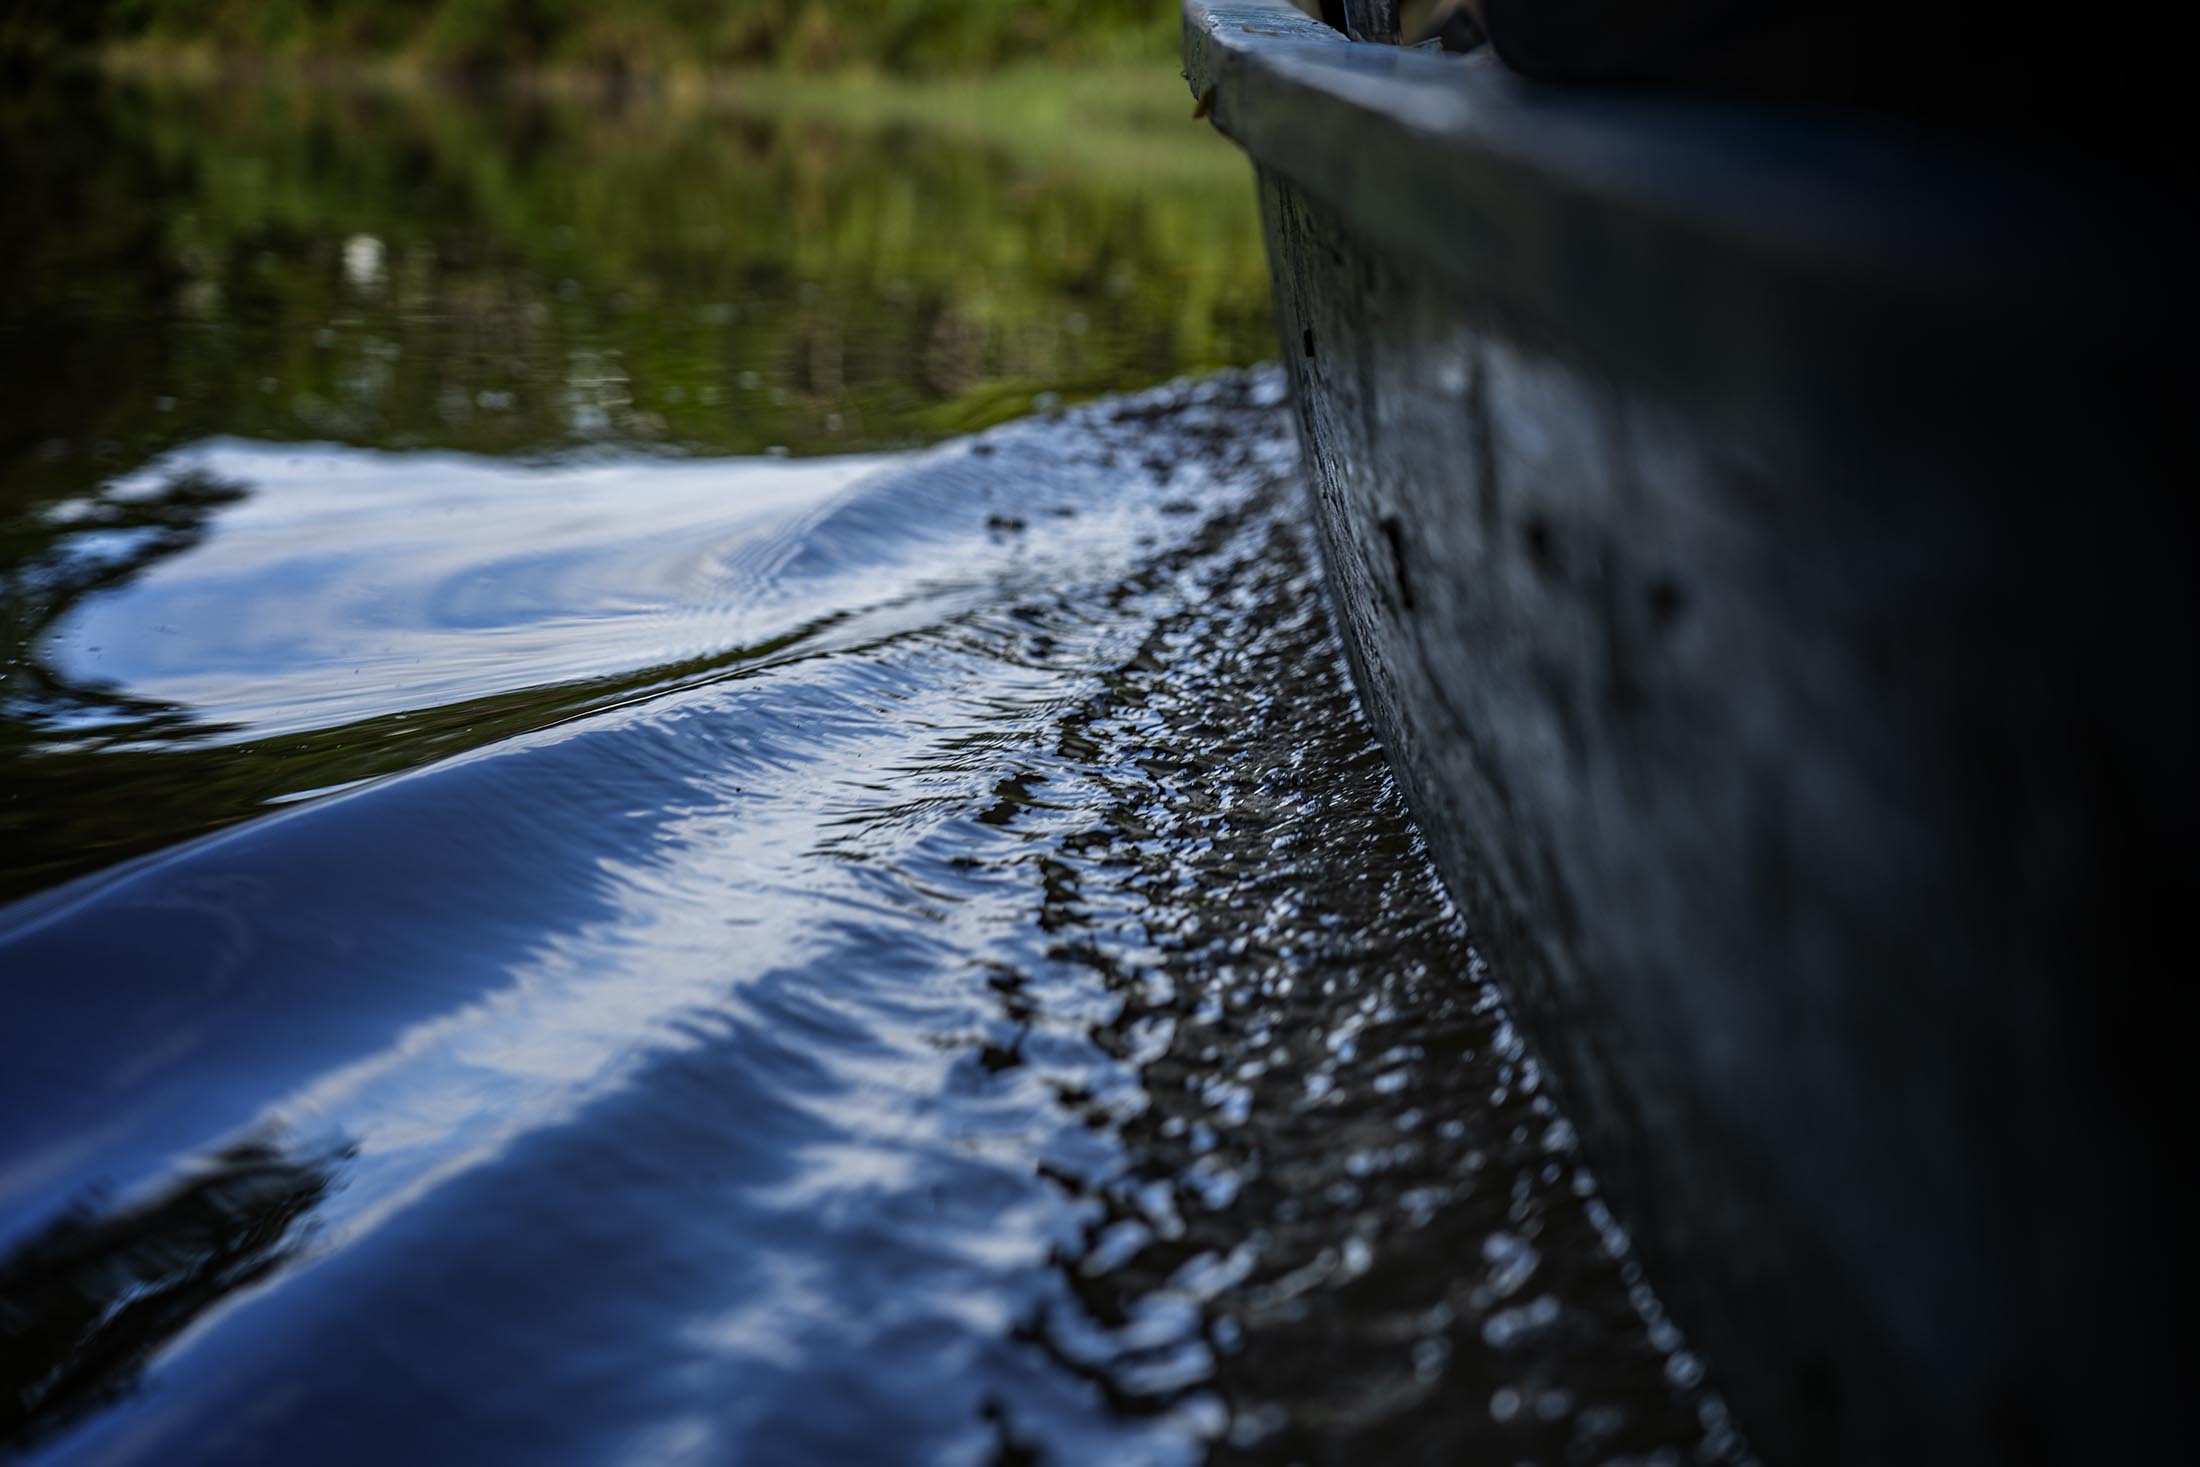 A closeup of the wakes being made in water by a boat